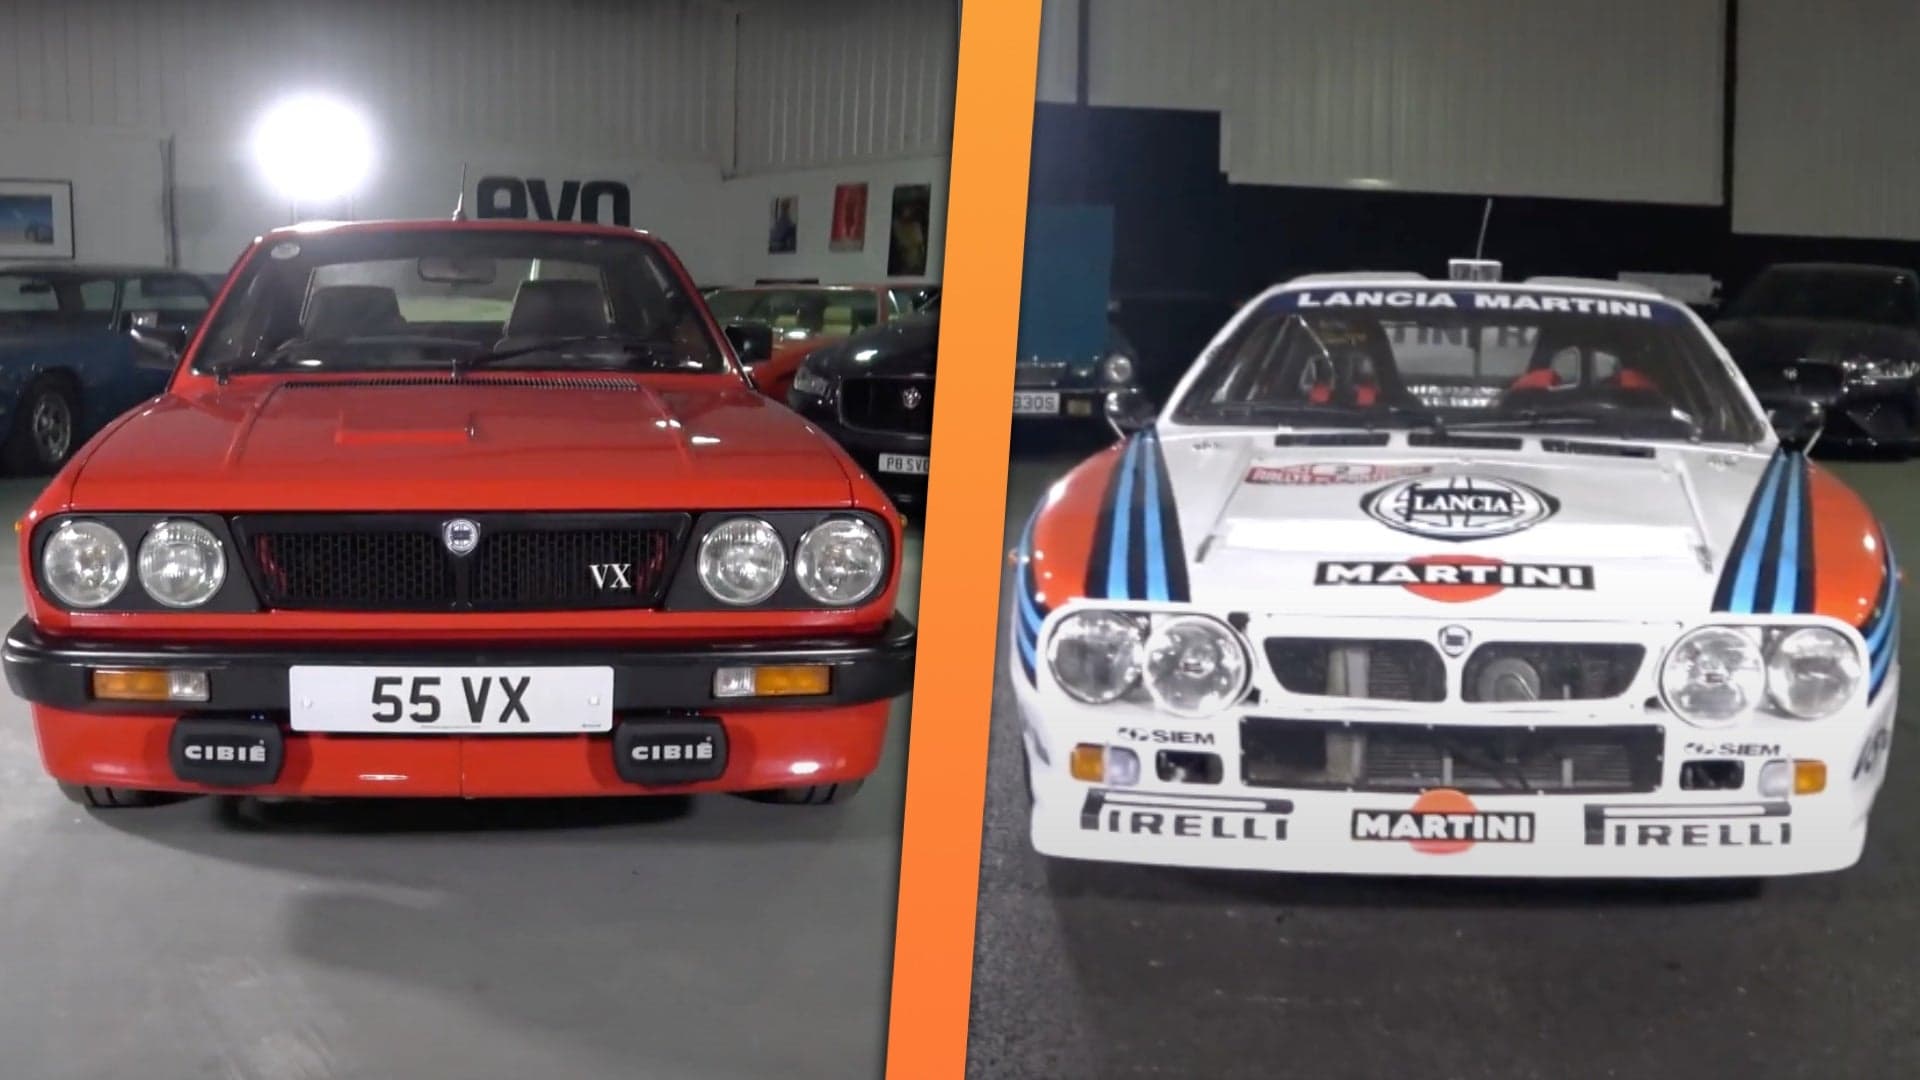 A Tale of Two Lancias: What You Learn Driving a WRC-Champ 037 and a Beta VX Back to Back